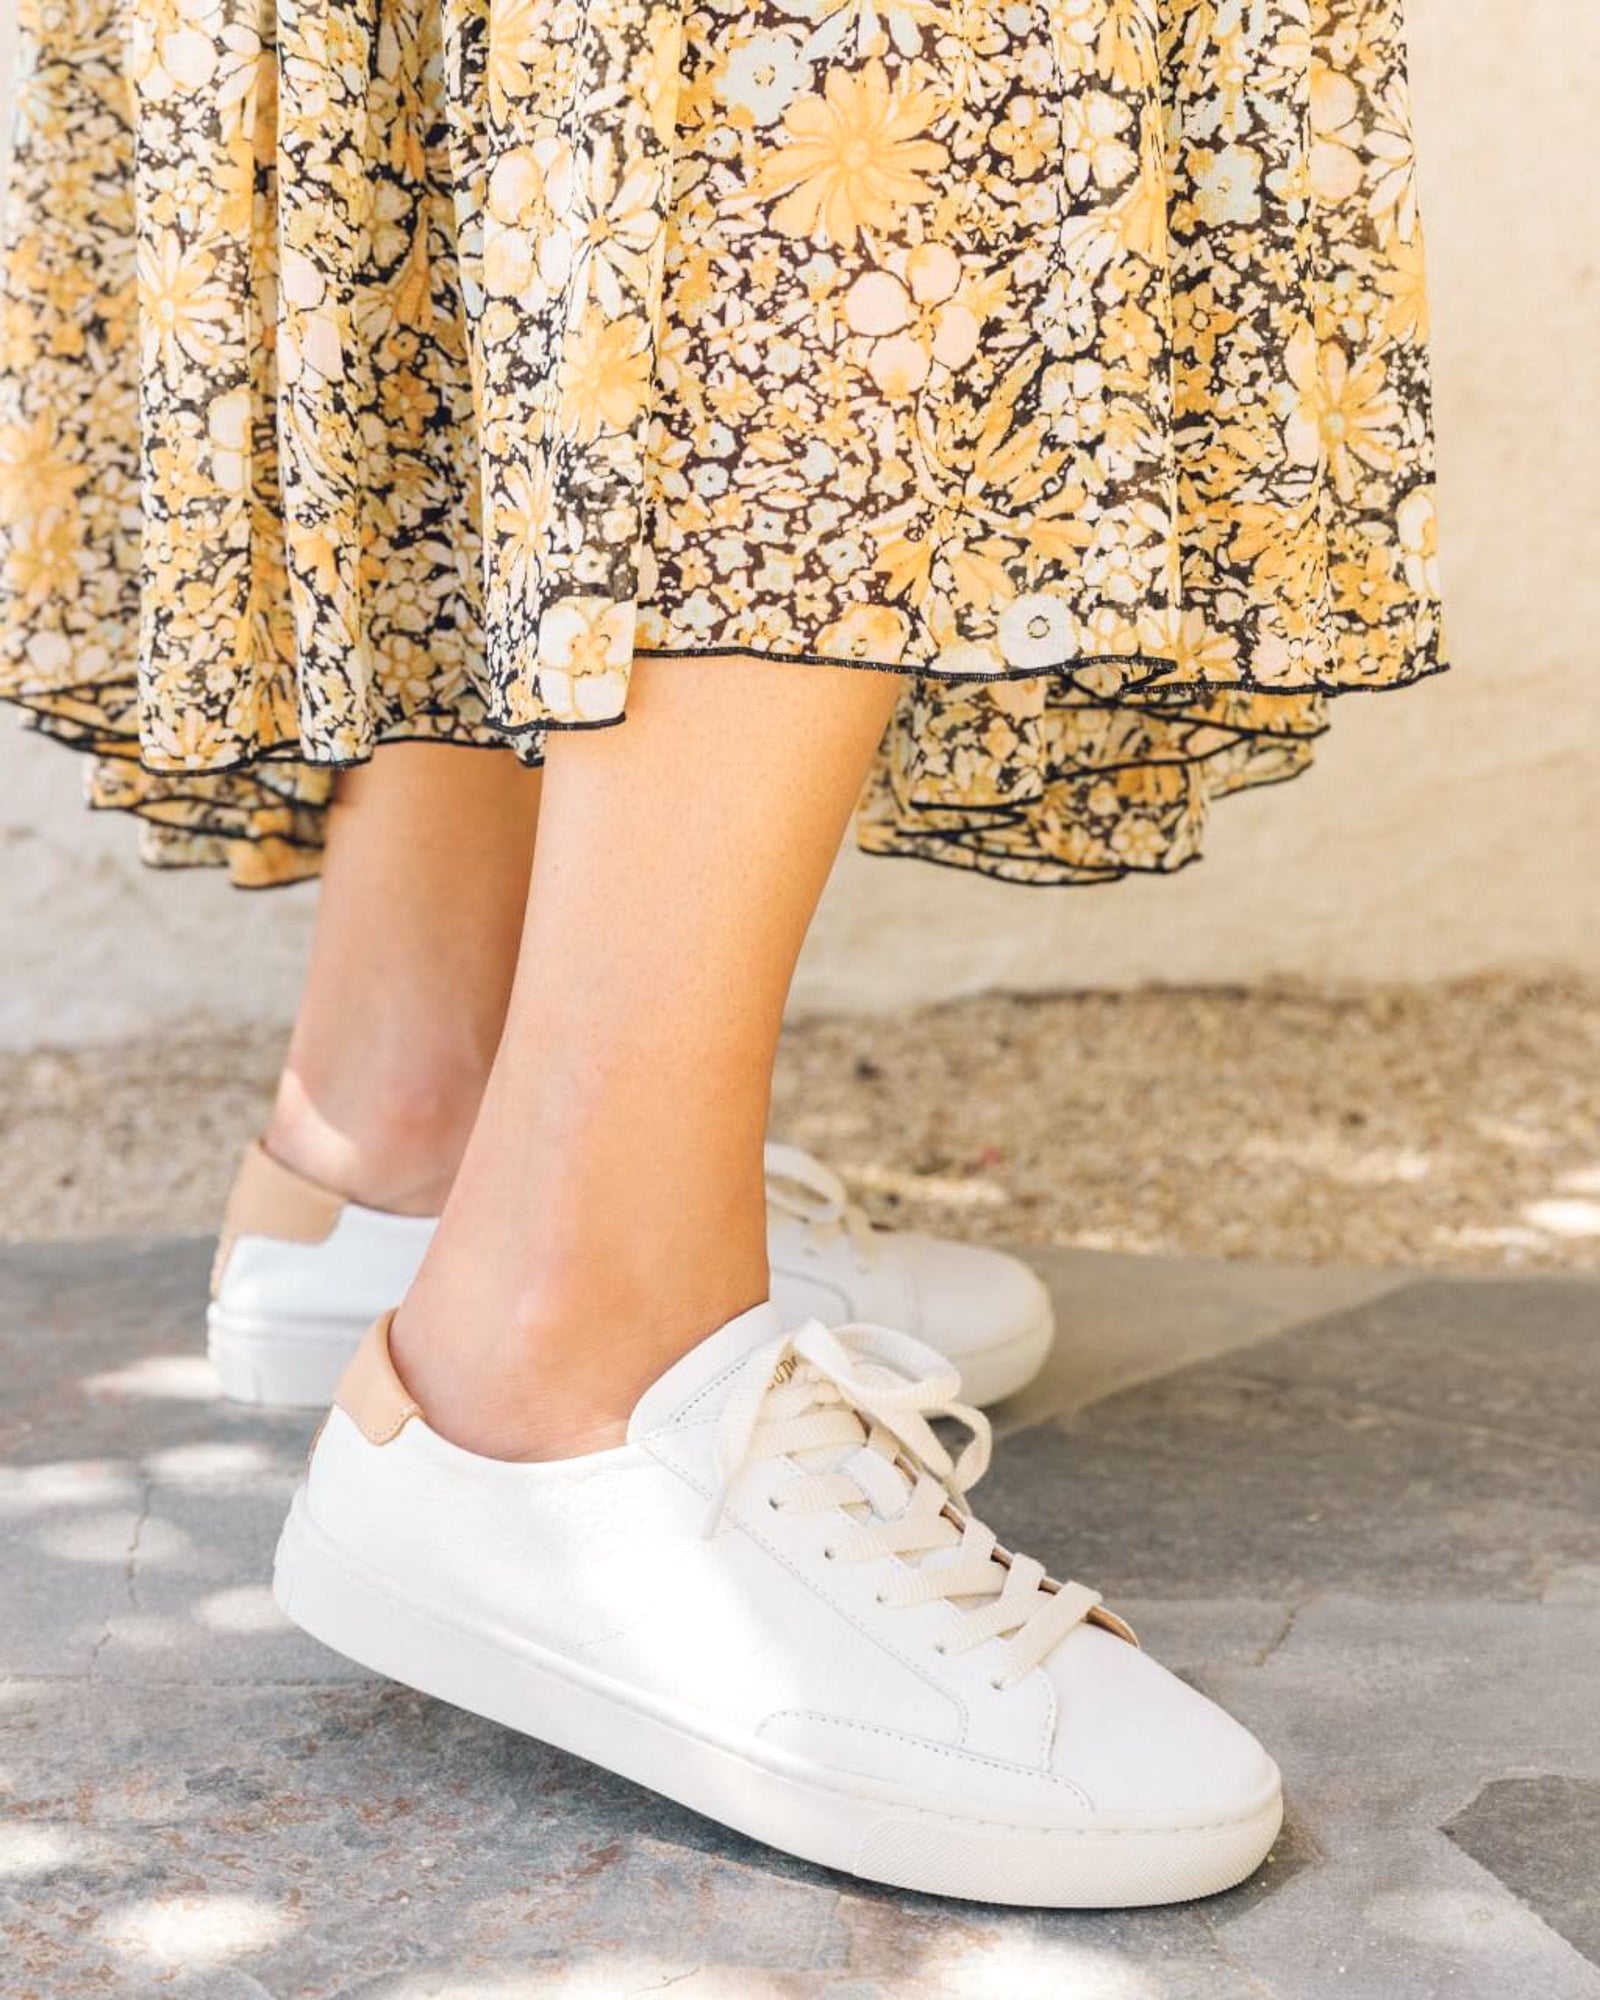 white classic leather low top sneakers